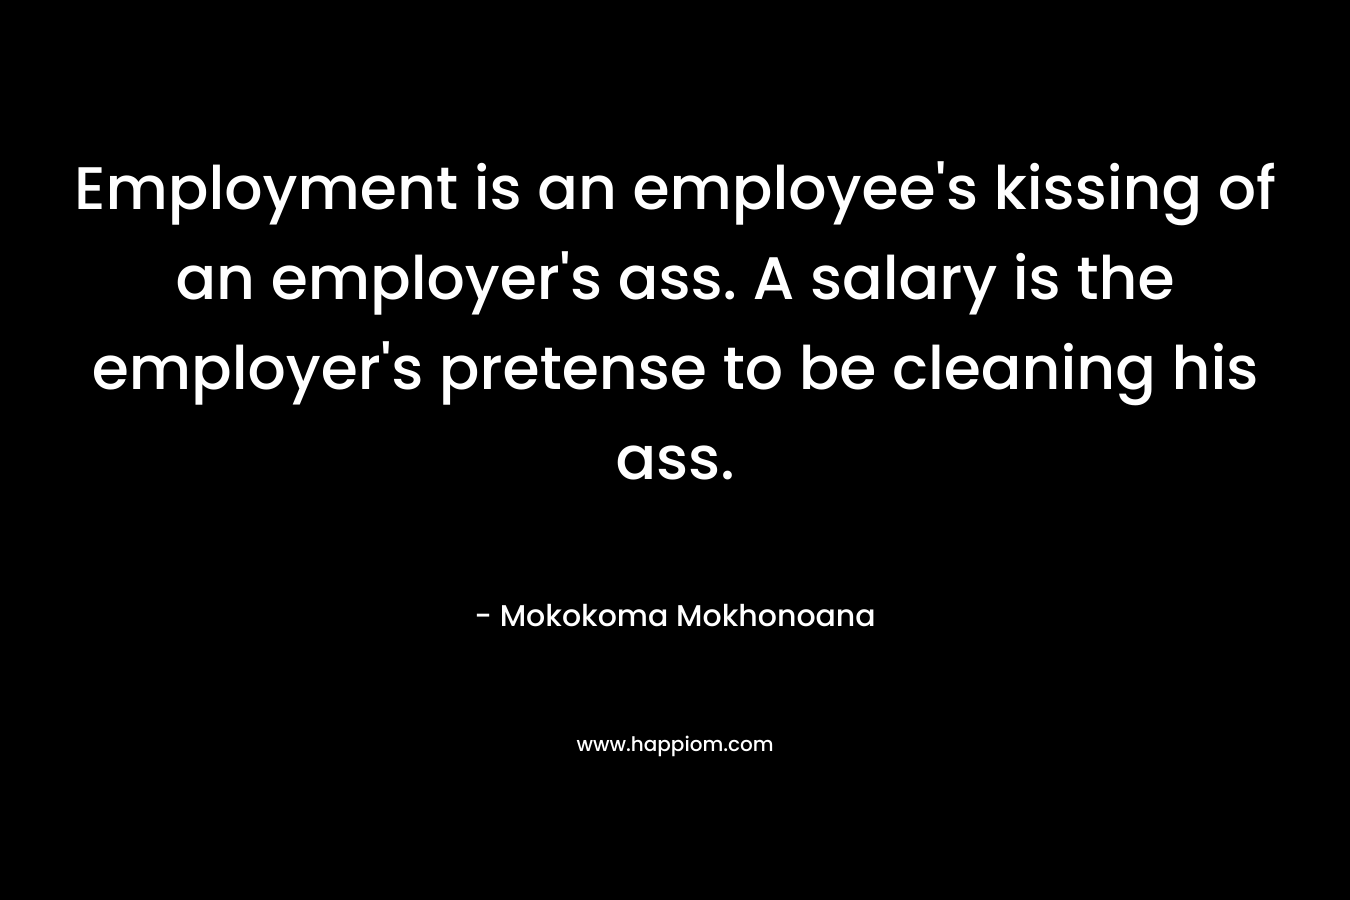 Employment is an employee’s kissing of an employer’s ass. A salary is the employer’s pretense to be cleaning his ass. – Mokokoma Mokhonoana